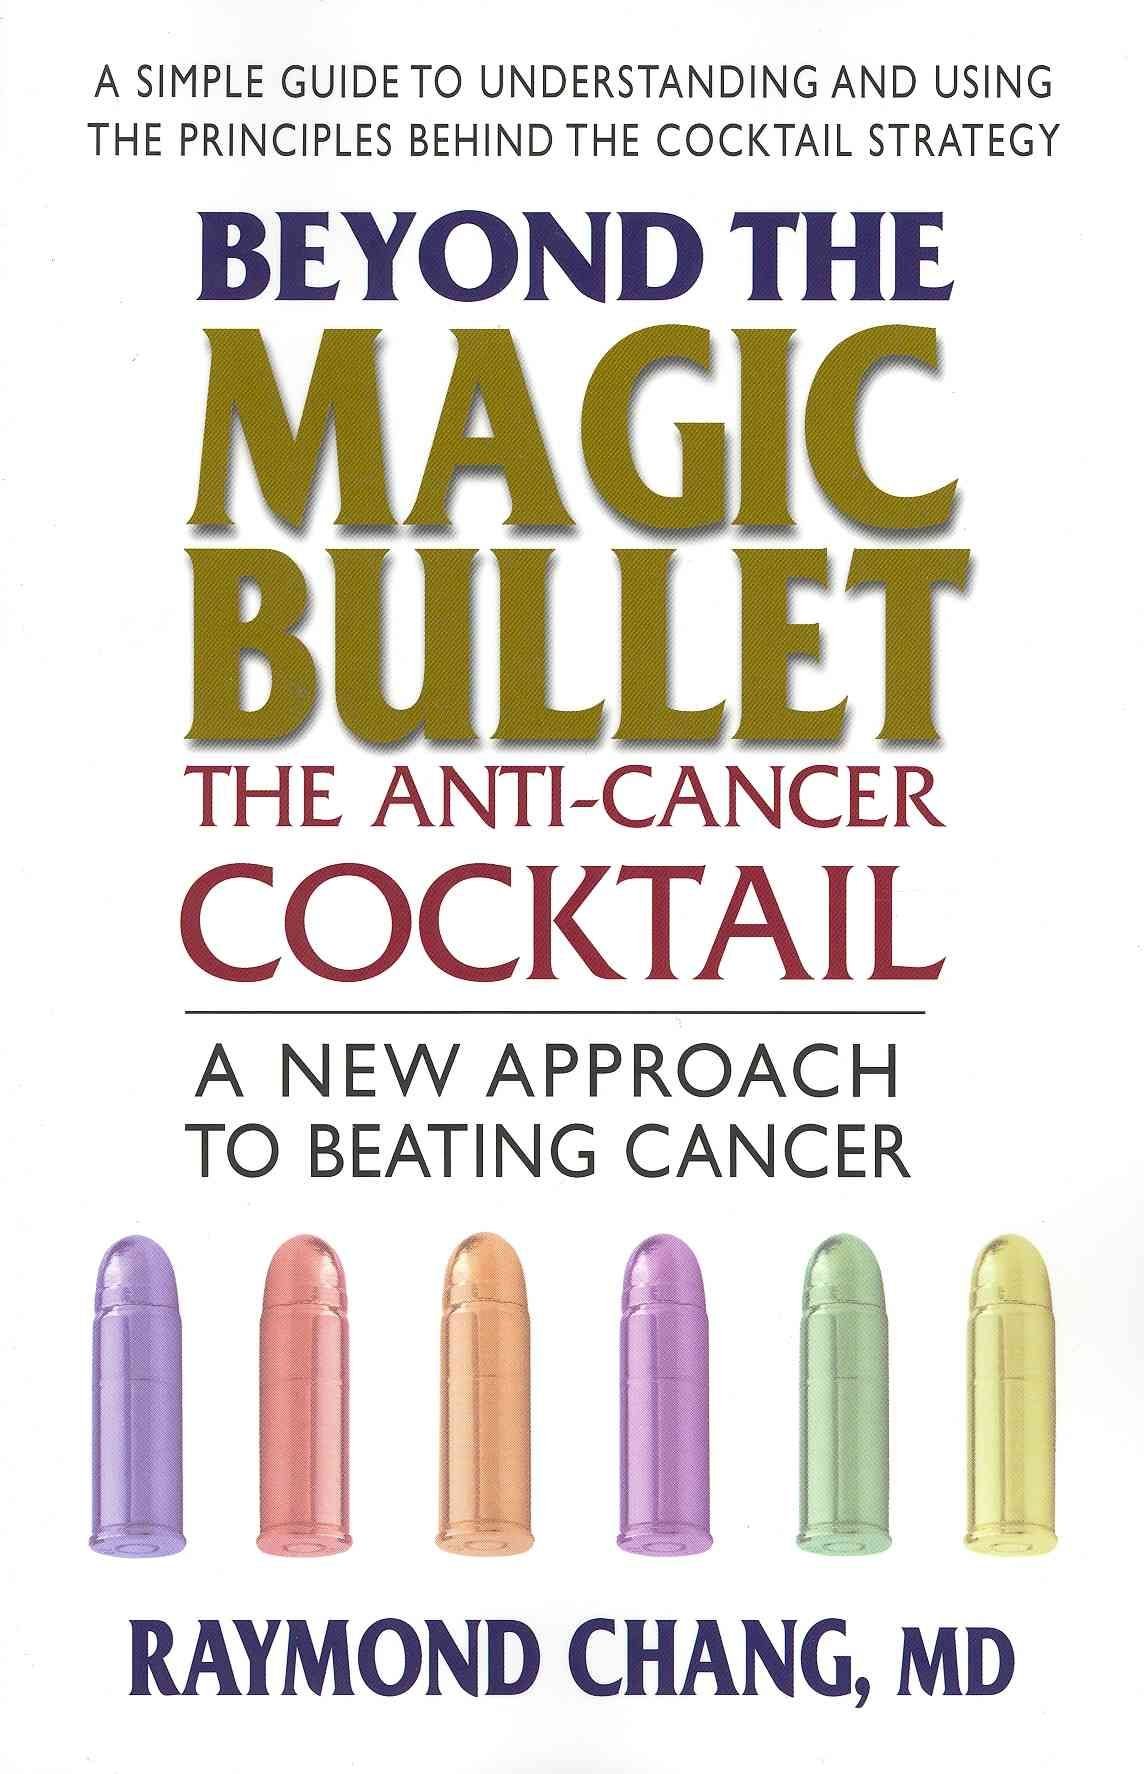 Beyond the Magic Bullet: the Anti-Cancer Cocktail